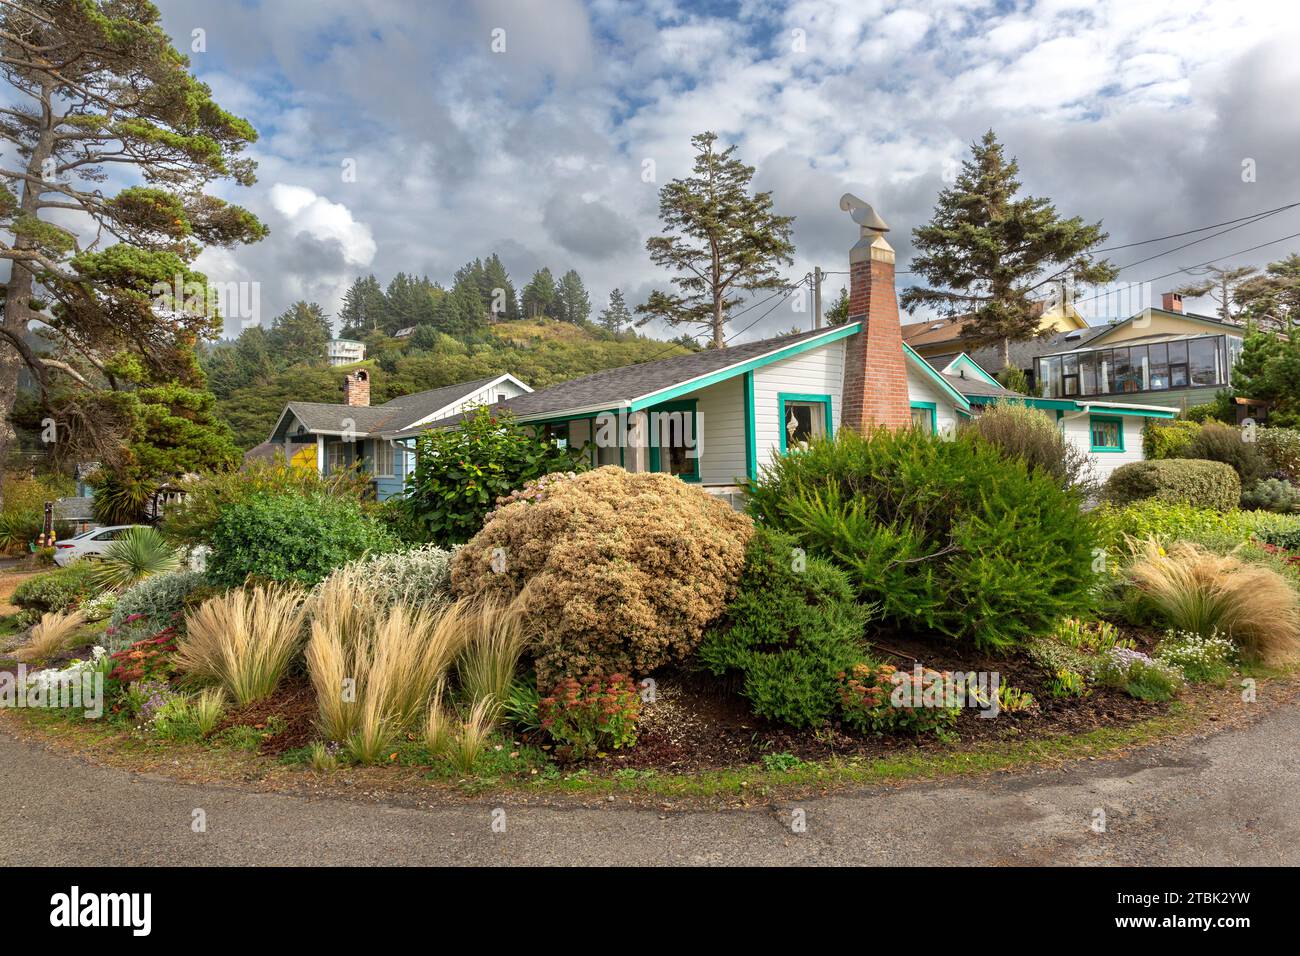 Gardens, plants, and coastal vacation homes in the small town of Neskowin, Oregon along the shores of the Pacific Ocean, USA Stock Photo